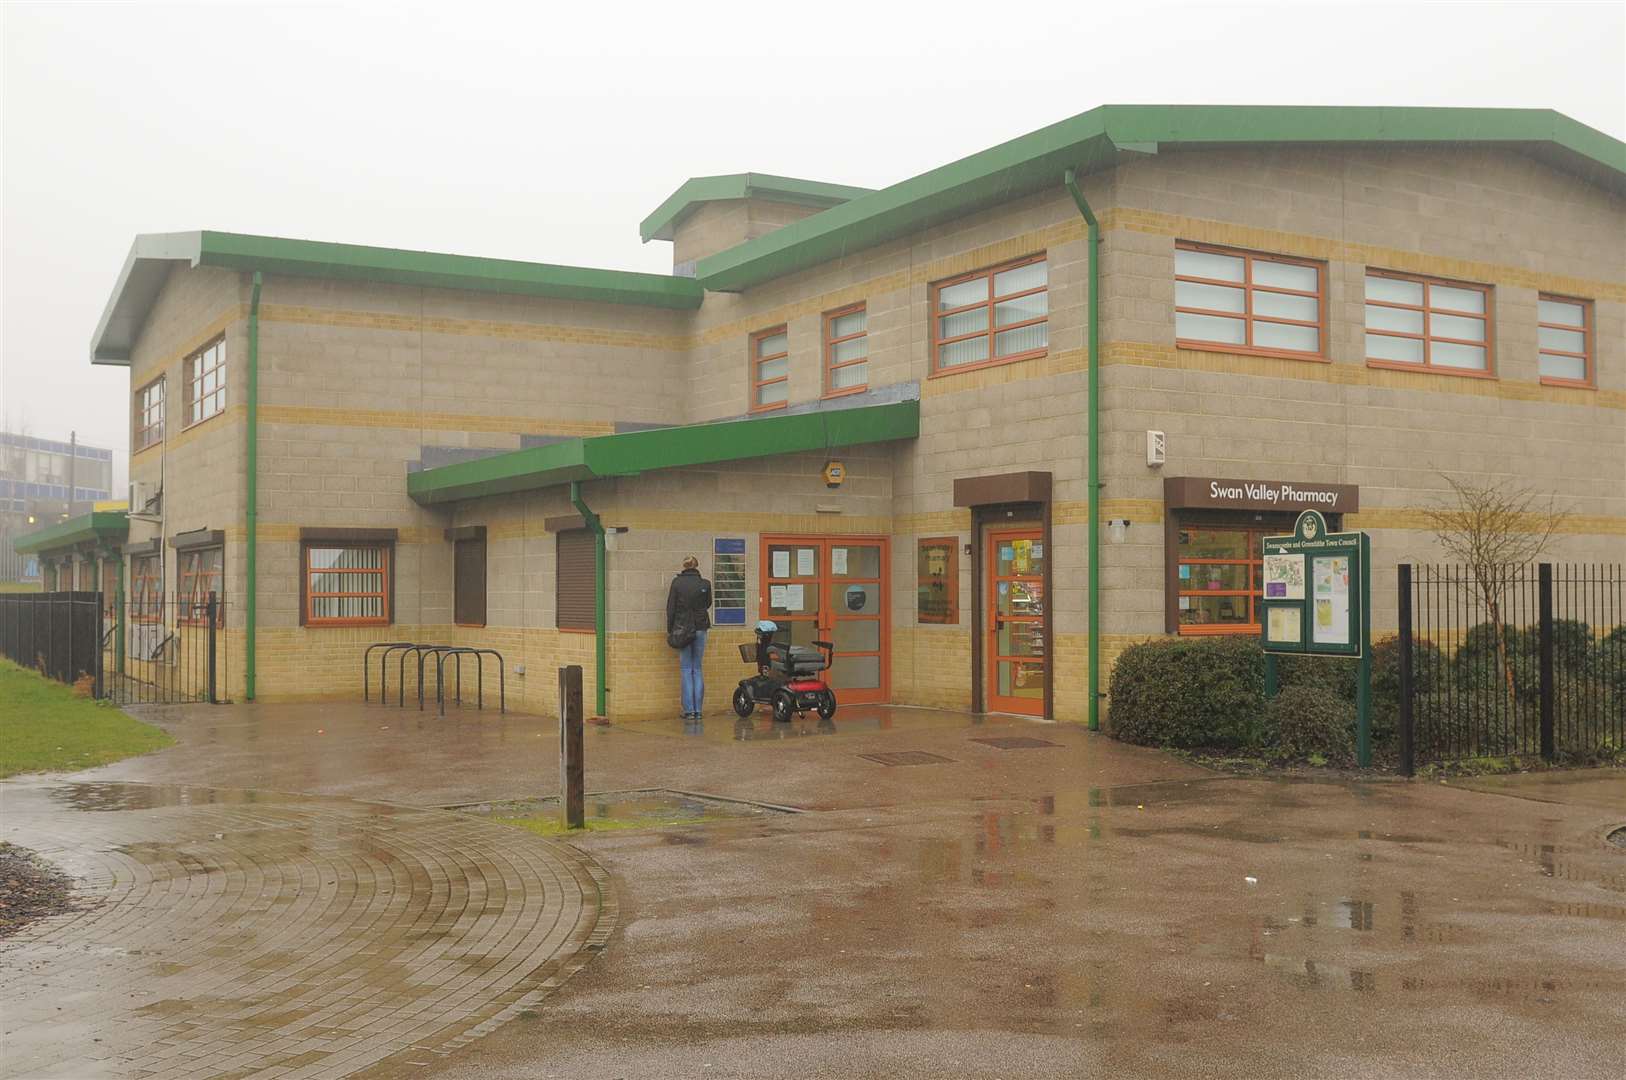 The Swanscombe Health centre where Dr Pandya practices, off Cooper Road. Picture: Steve Crispe